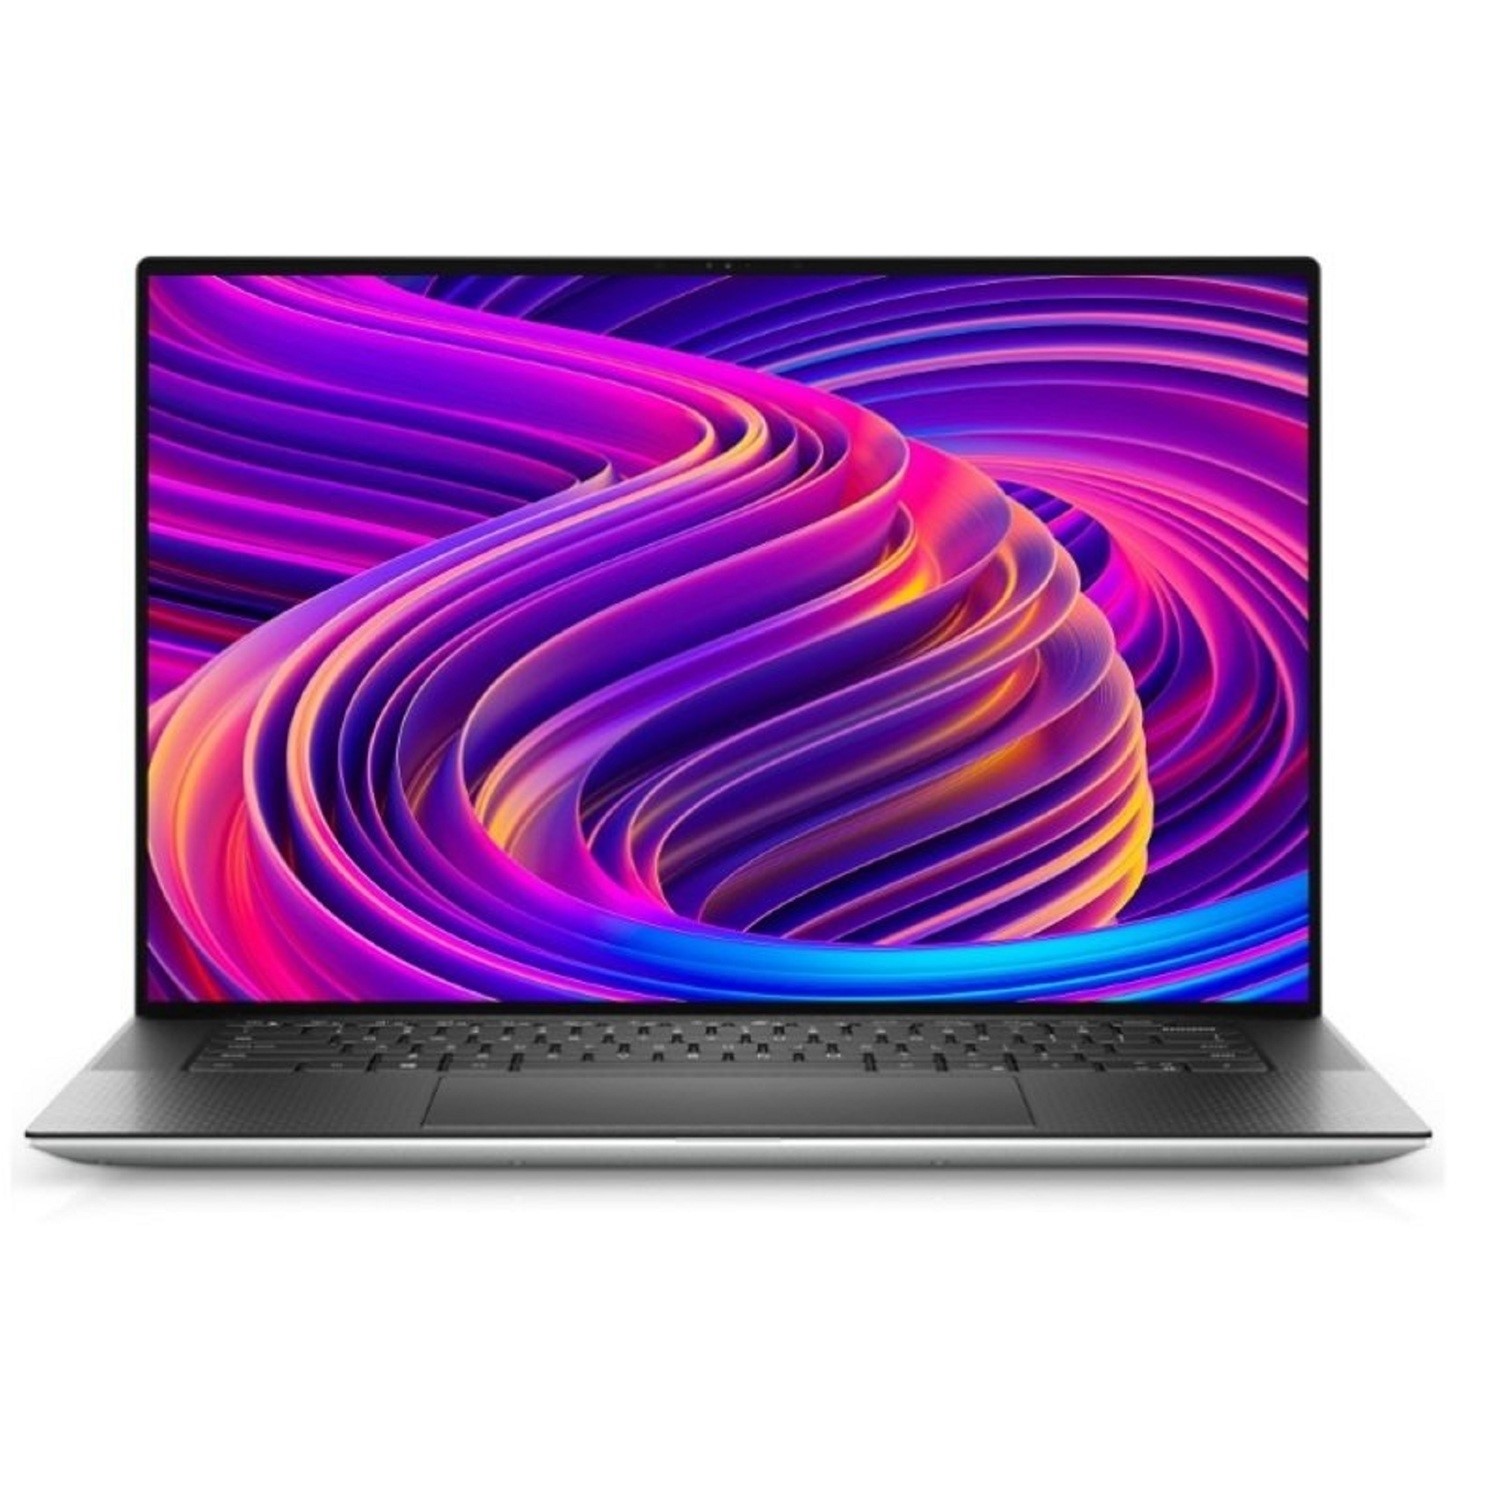 Dell XPS 15 9510 Core i7 11800H 16GB 512GB SSD 15.6 Inch Windows 10 Pro Laptop - Laptops Direct